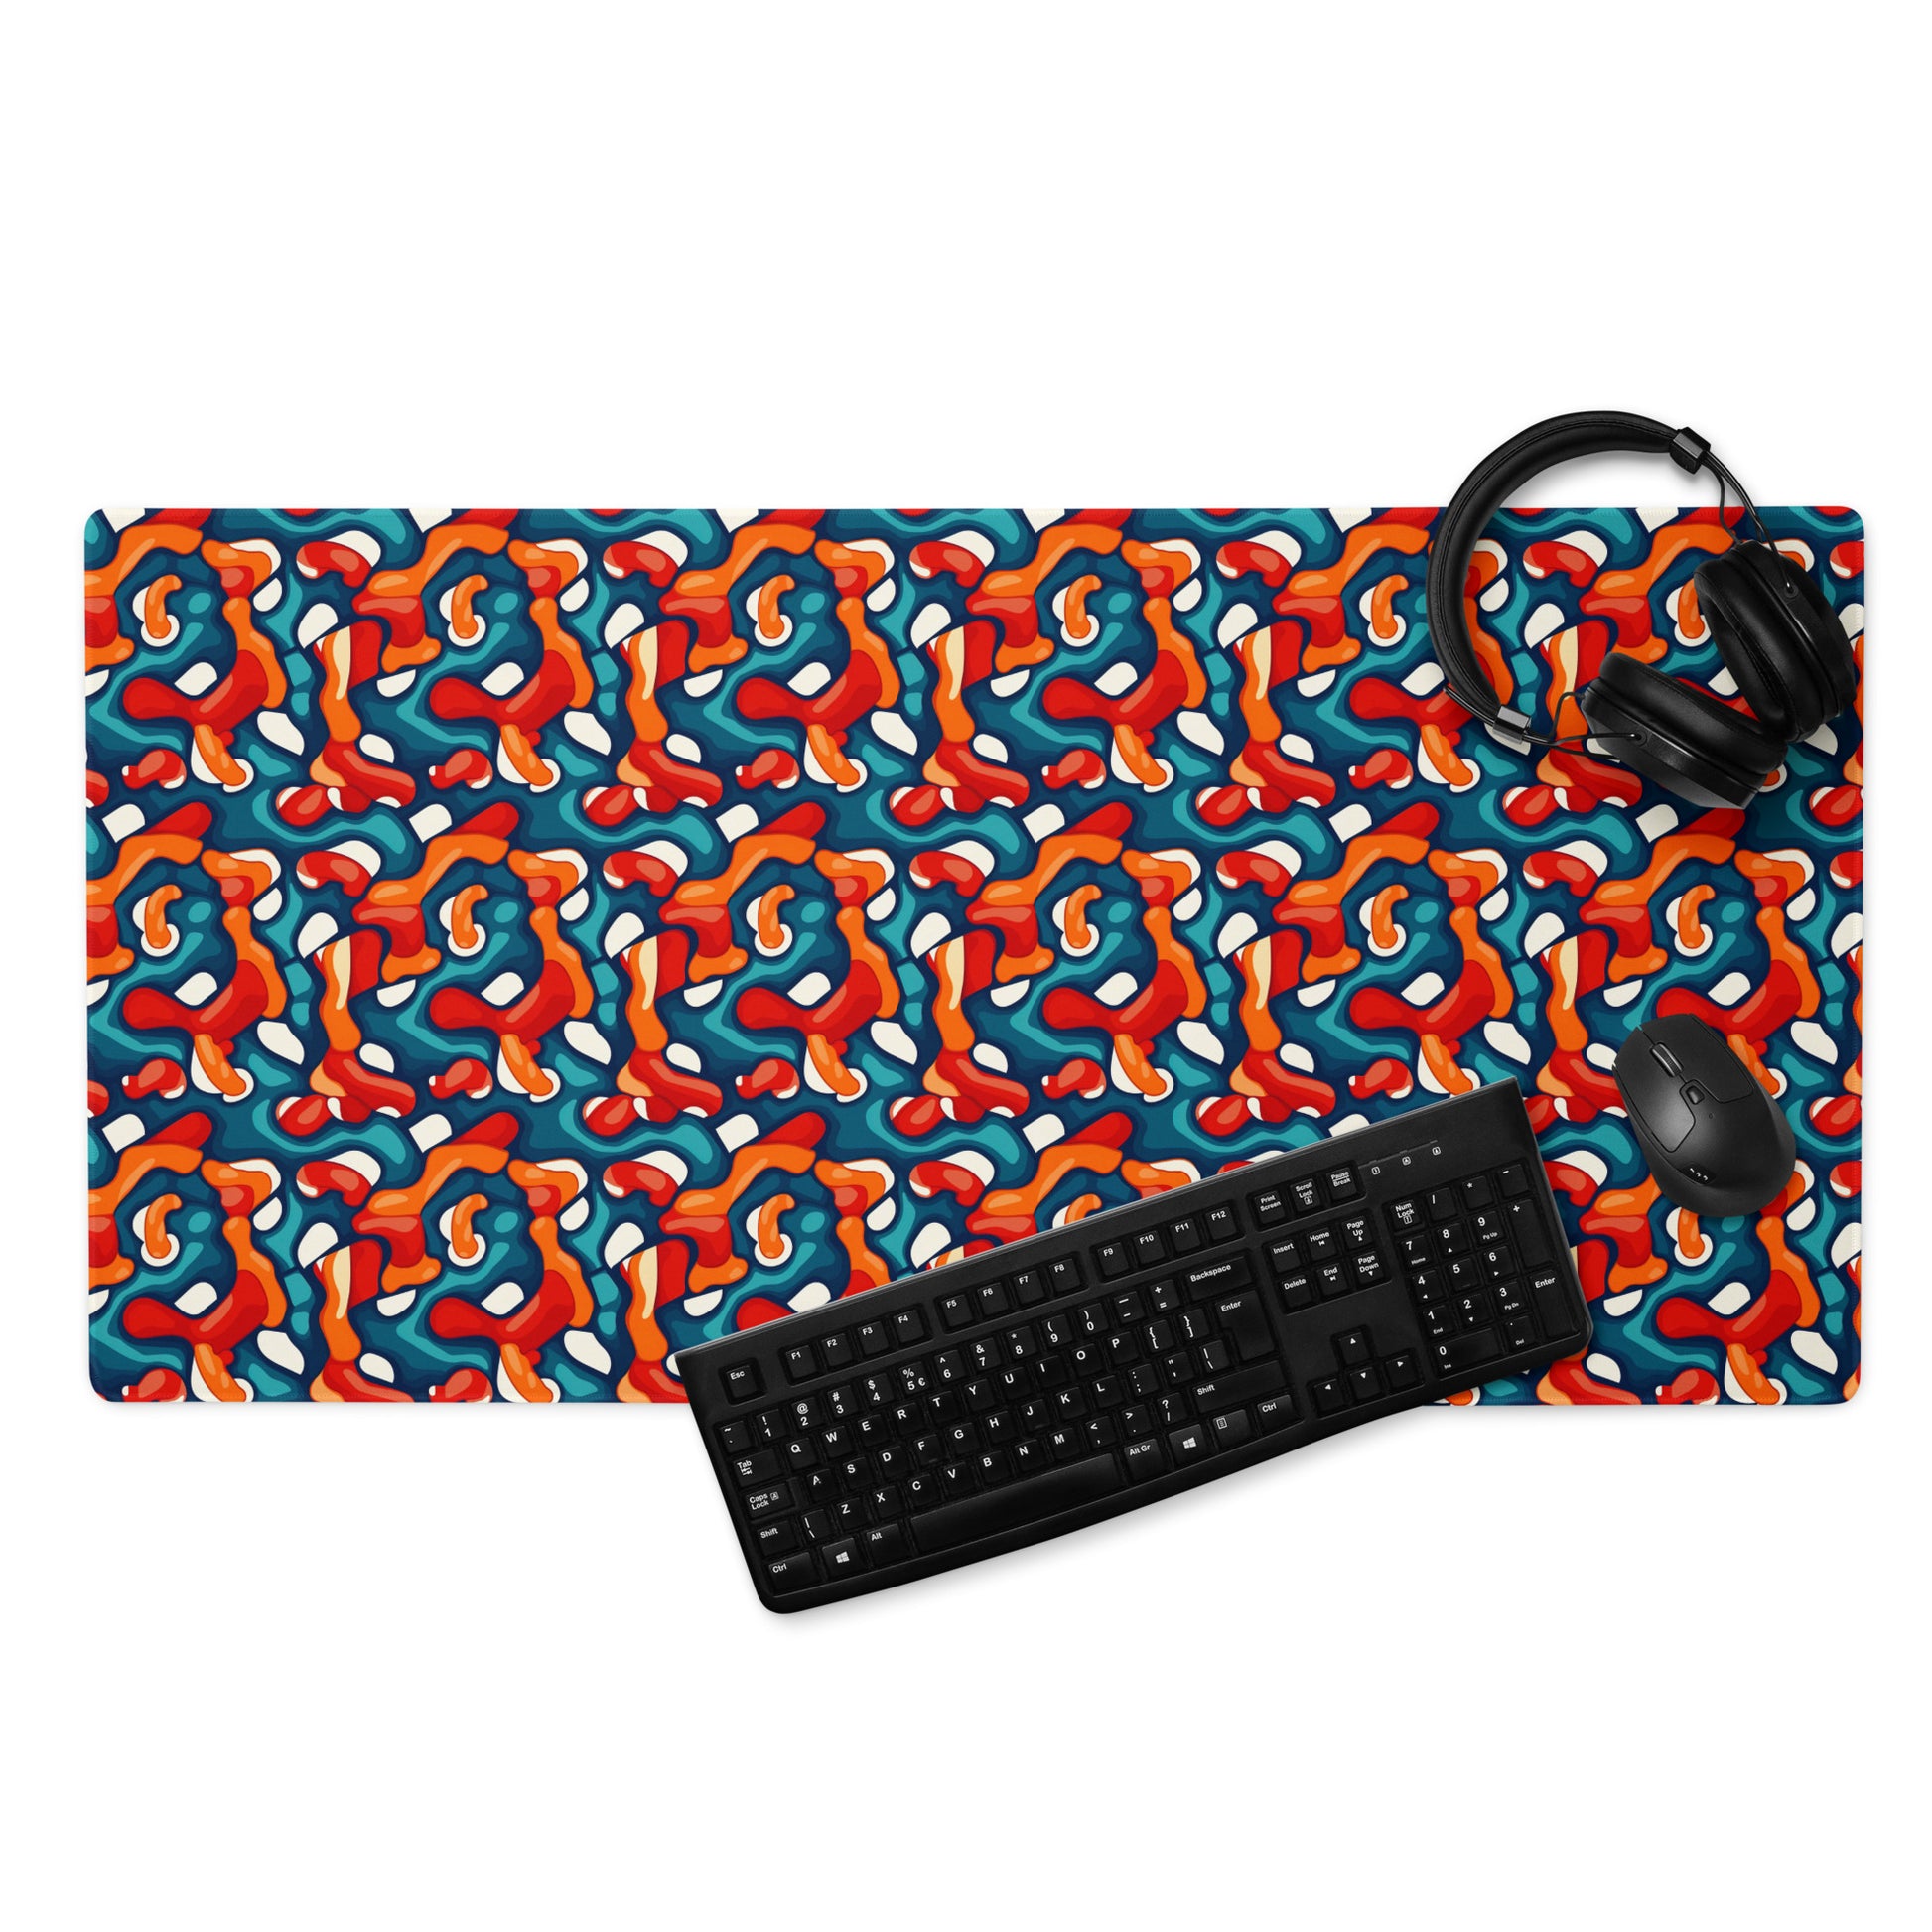 A 36" x 18" desk pad with abstract line art on it displayed with a keyboard, headphones and a mouse. Red, Teal and Orange in color.